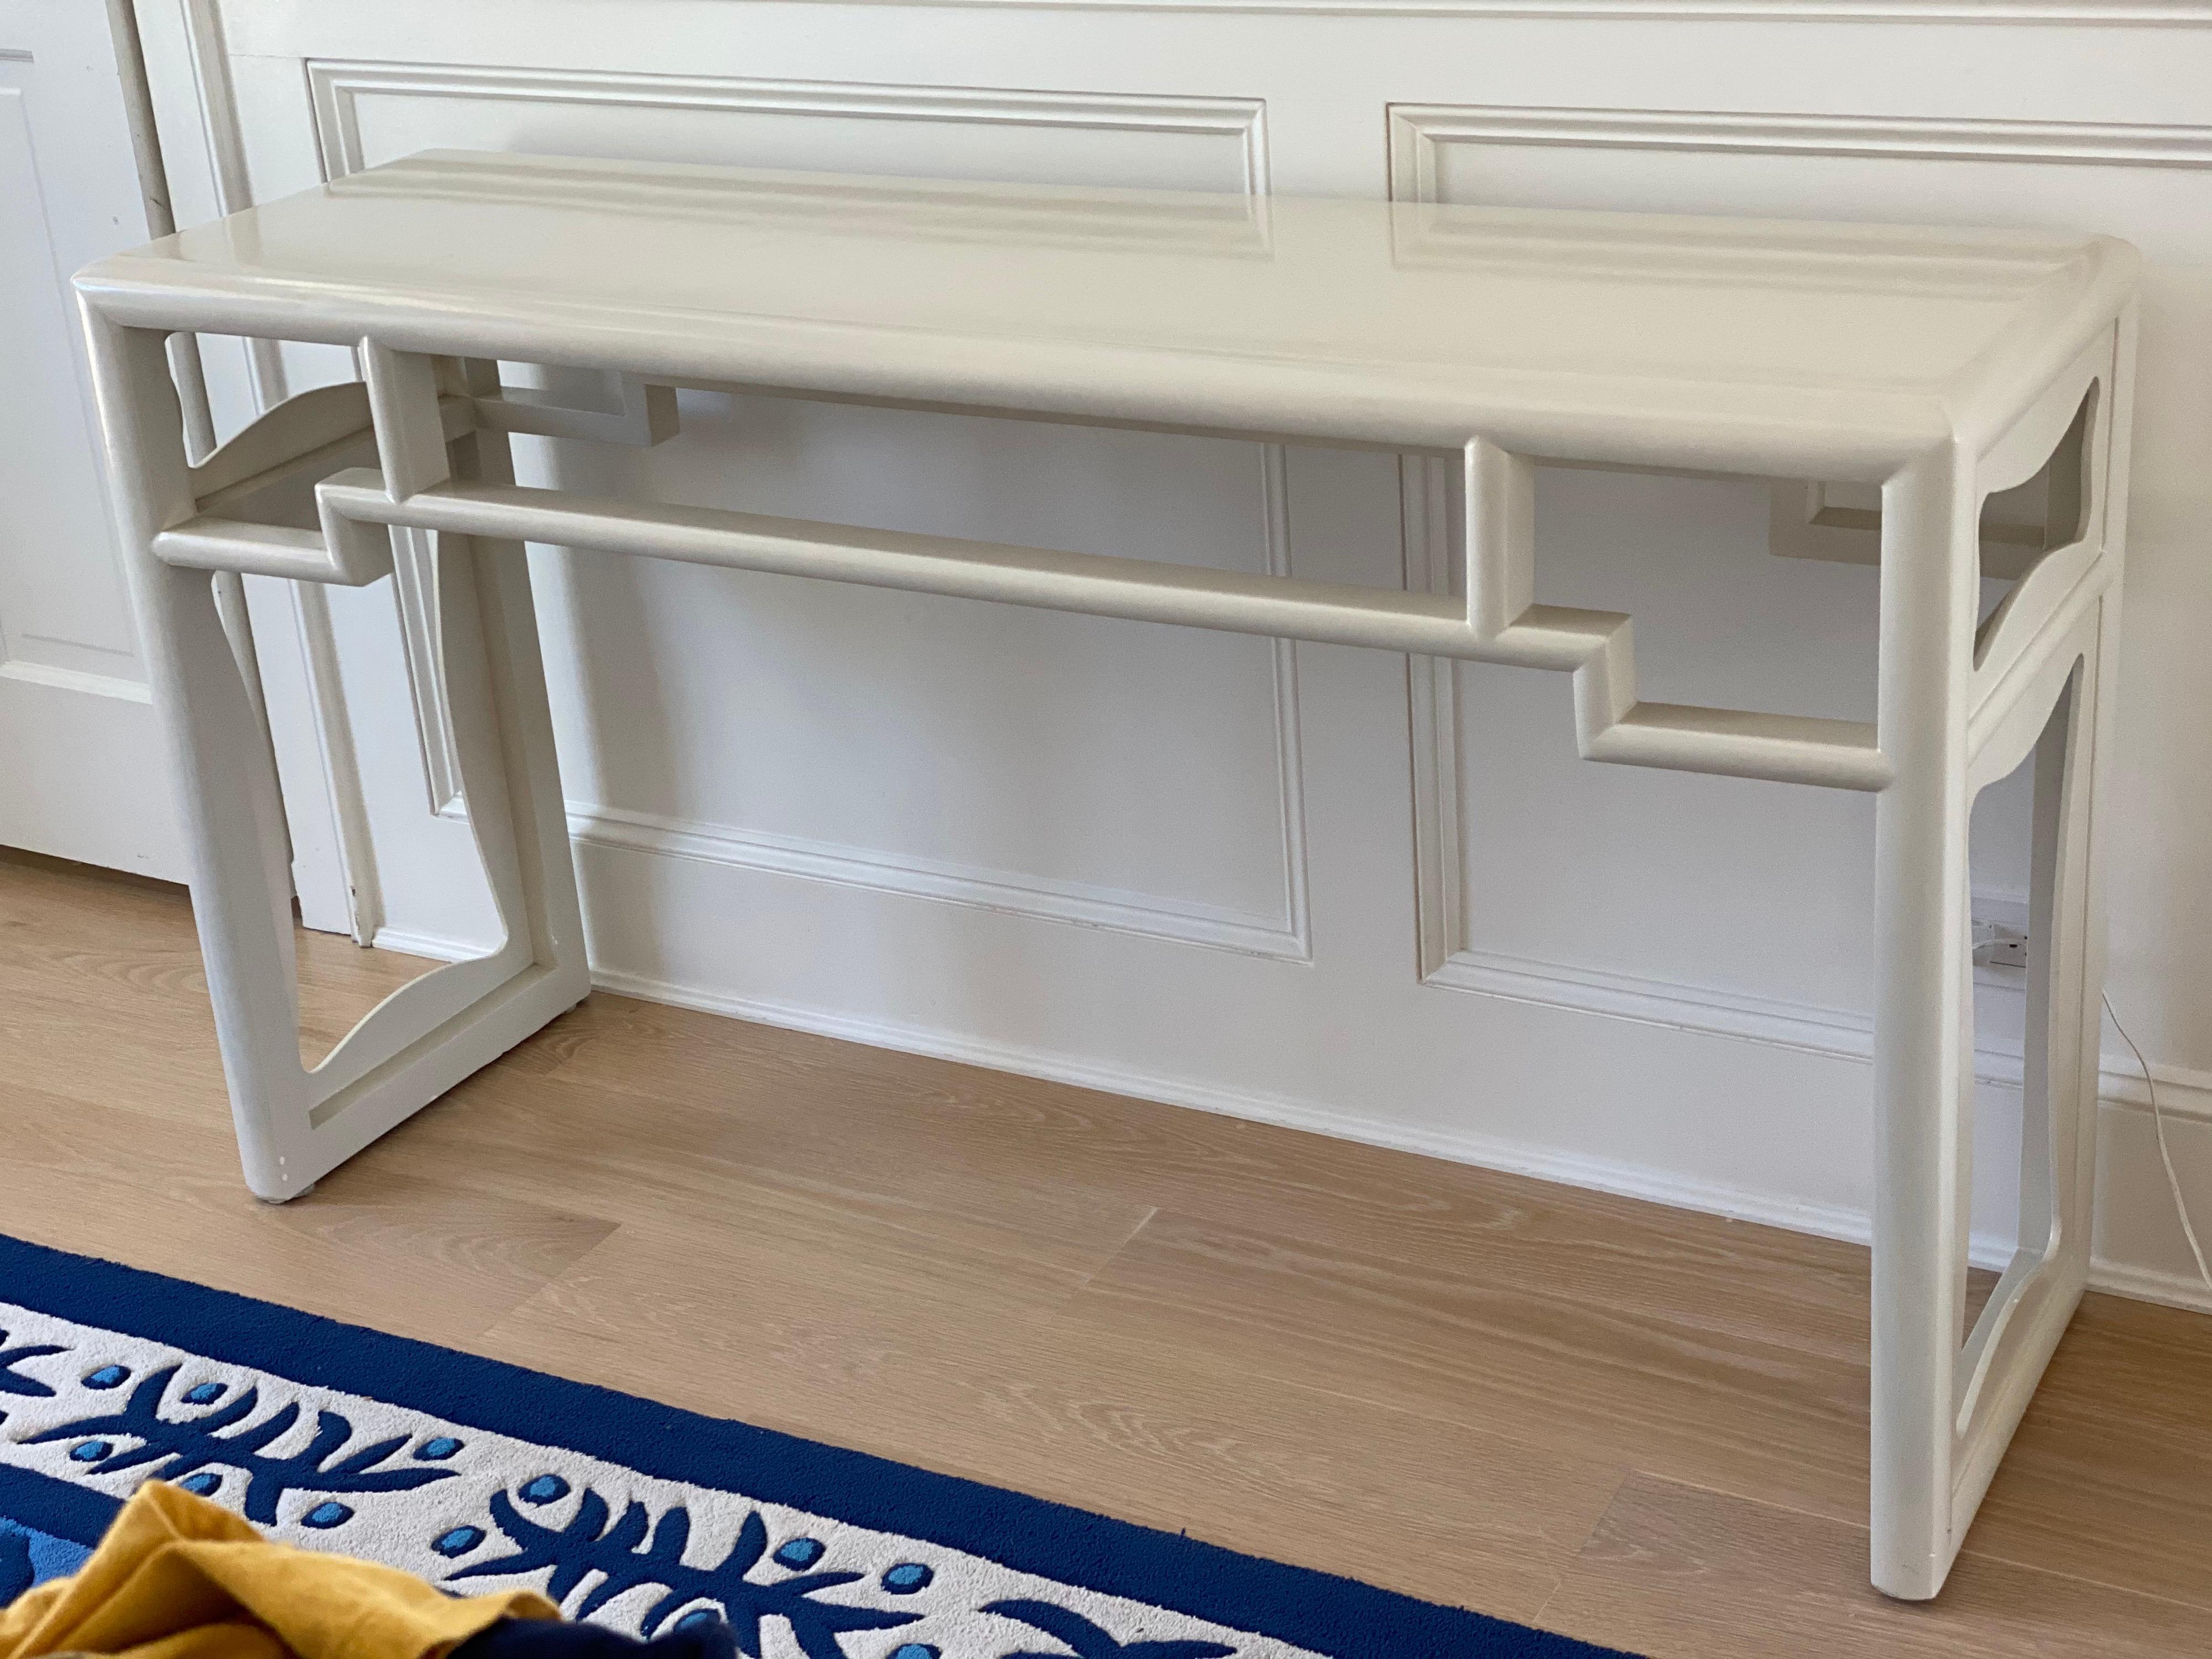 Ivory lacquered Chinese Chippendale style console table
One Knick on side rail otherwise very good condition. Light wear to the top.
Measures: 54